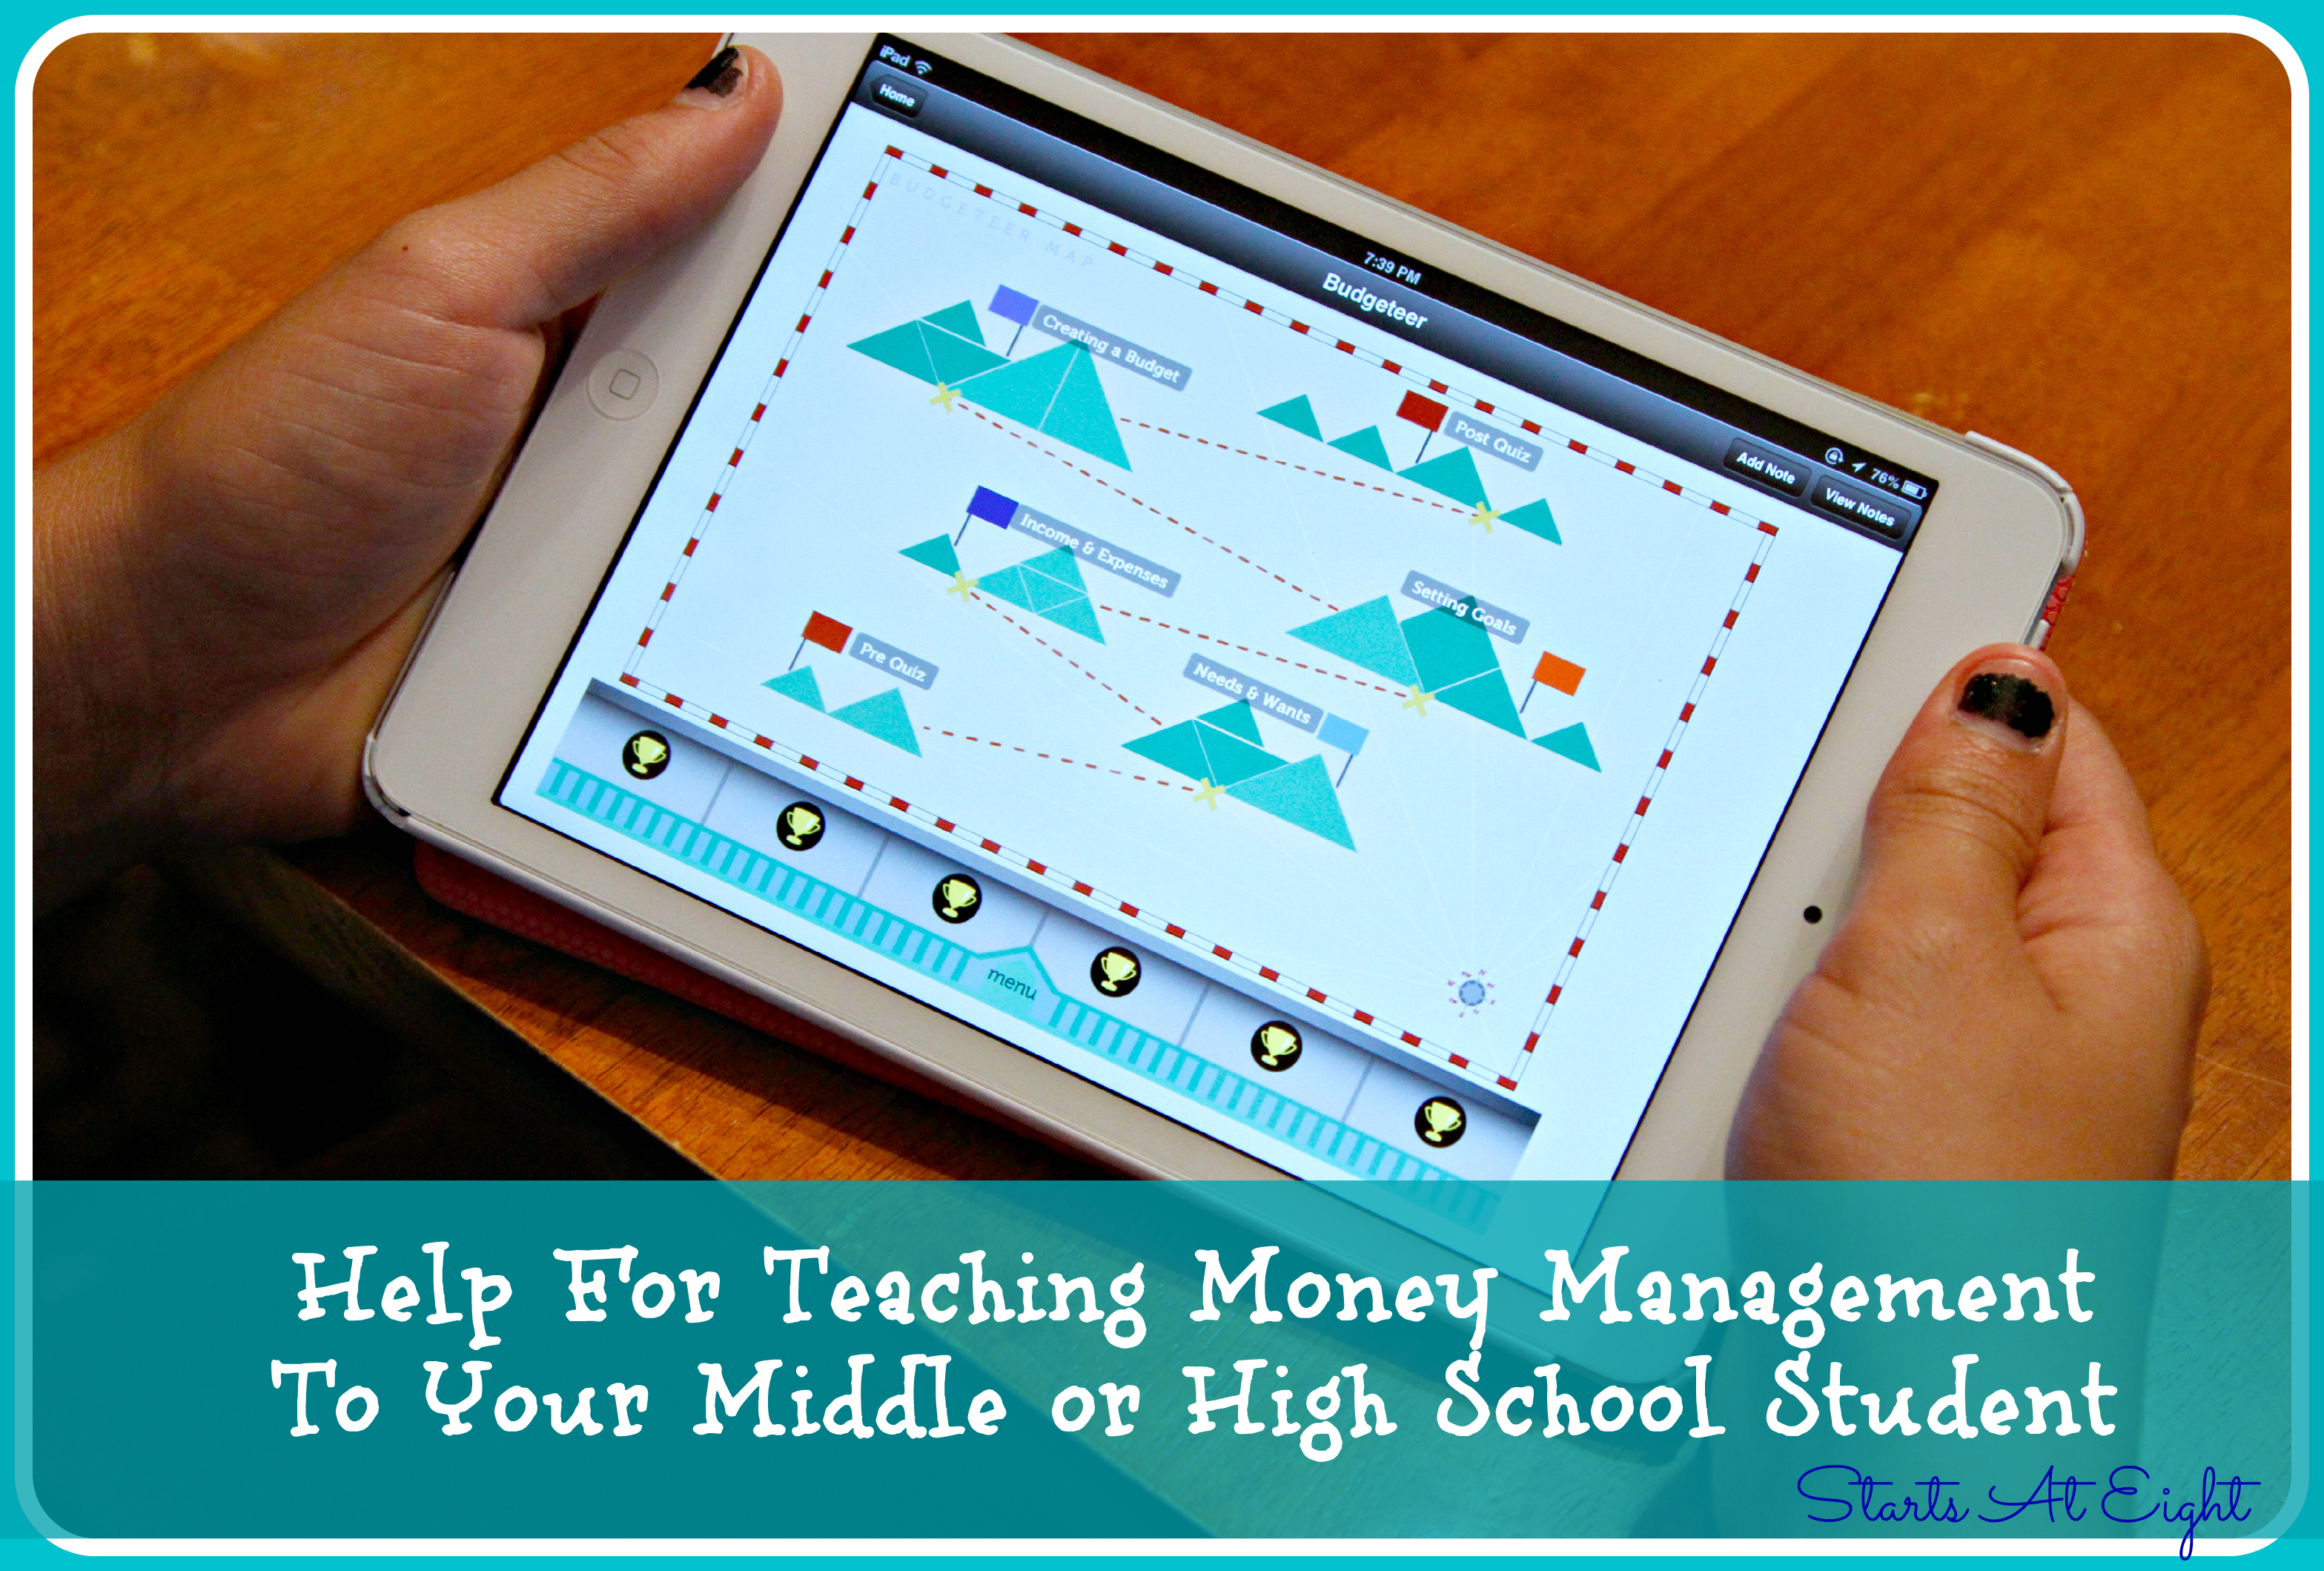 Help For Teaching Money Management To Your Middle or High School Student from Starts At Eight